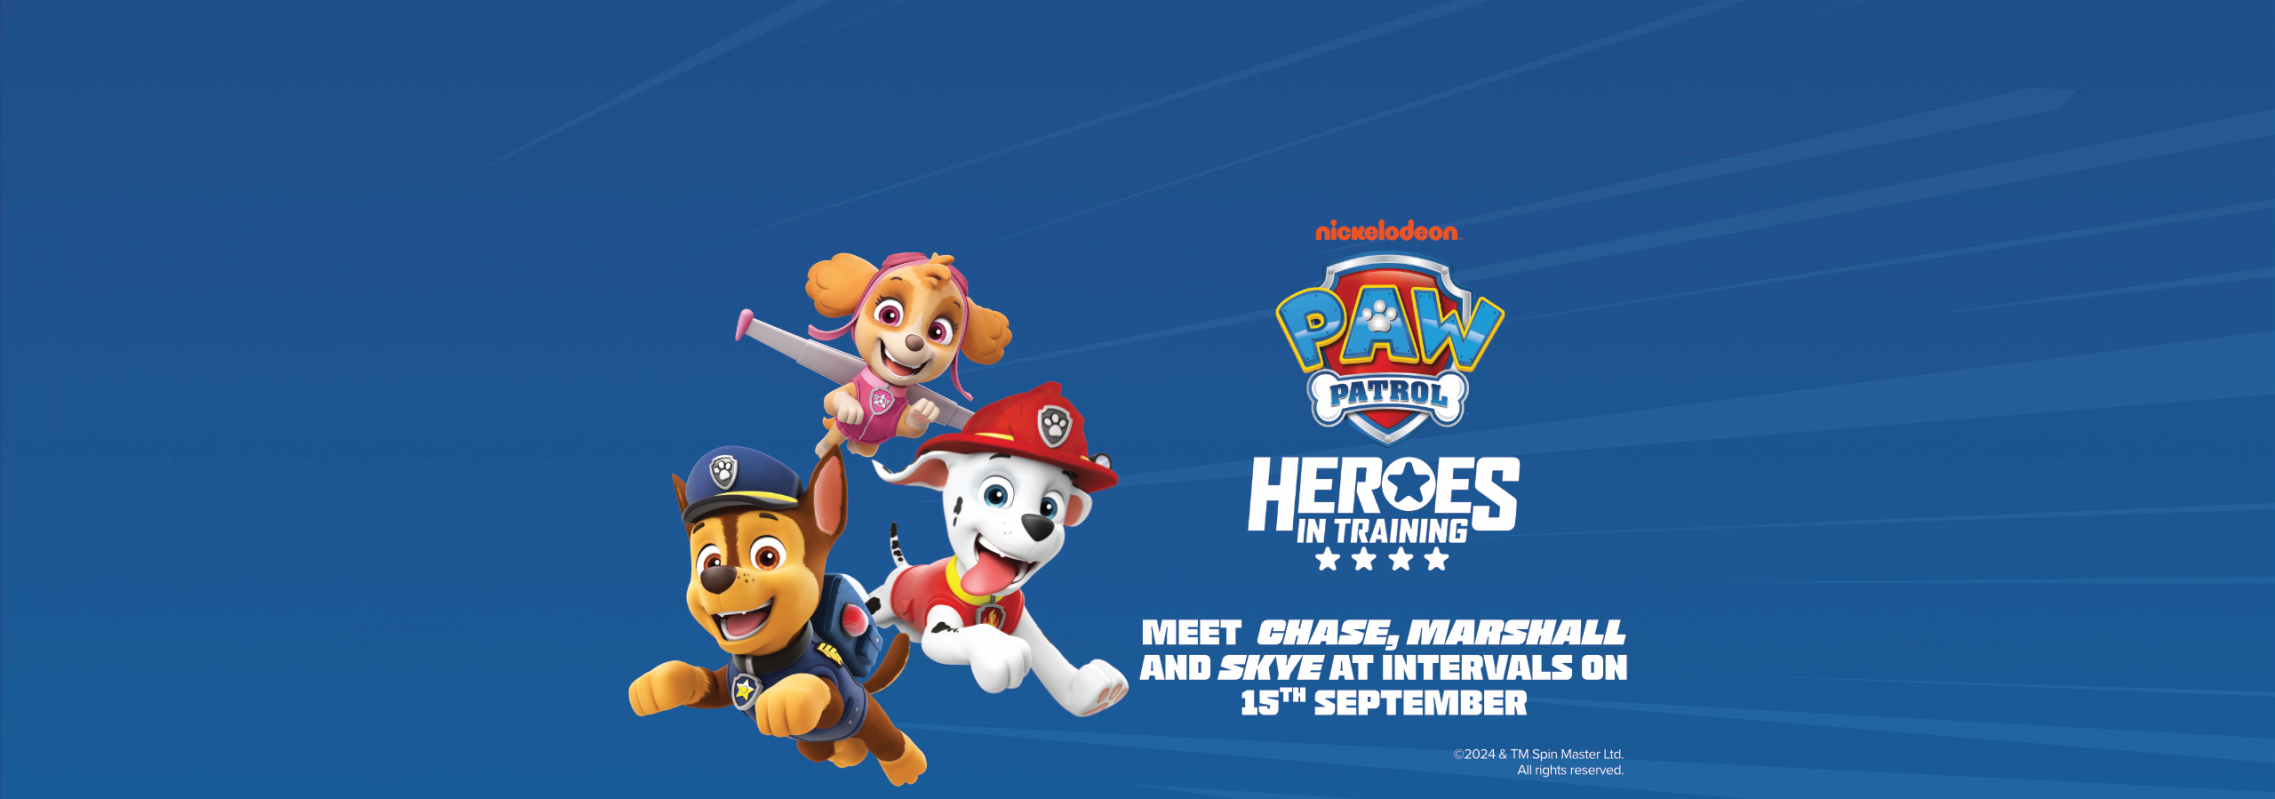 BM PAW Patrol Website Homepage and Events Page Header_layout_003.png